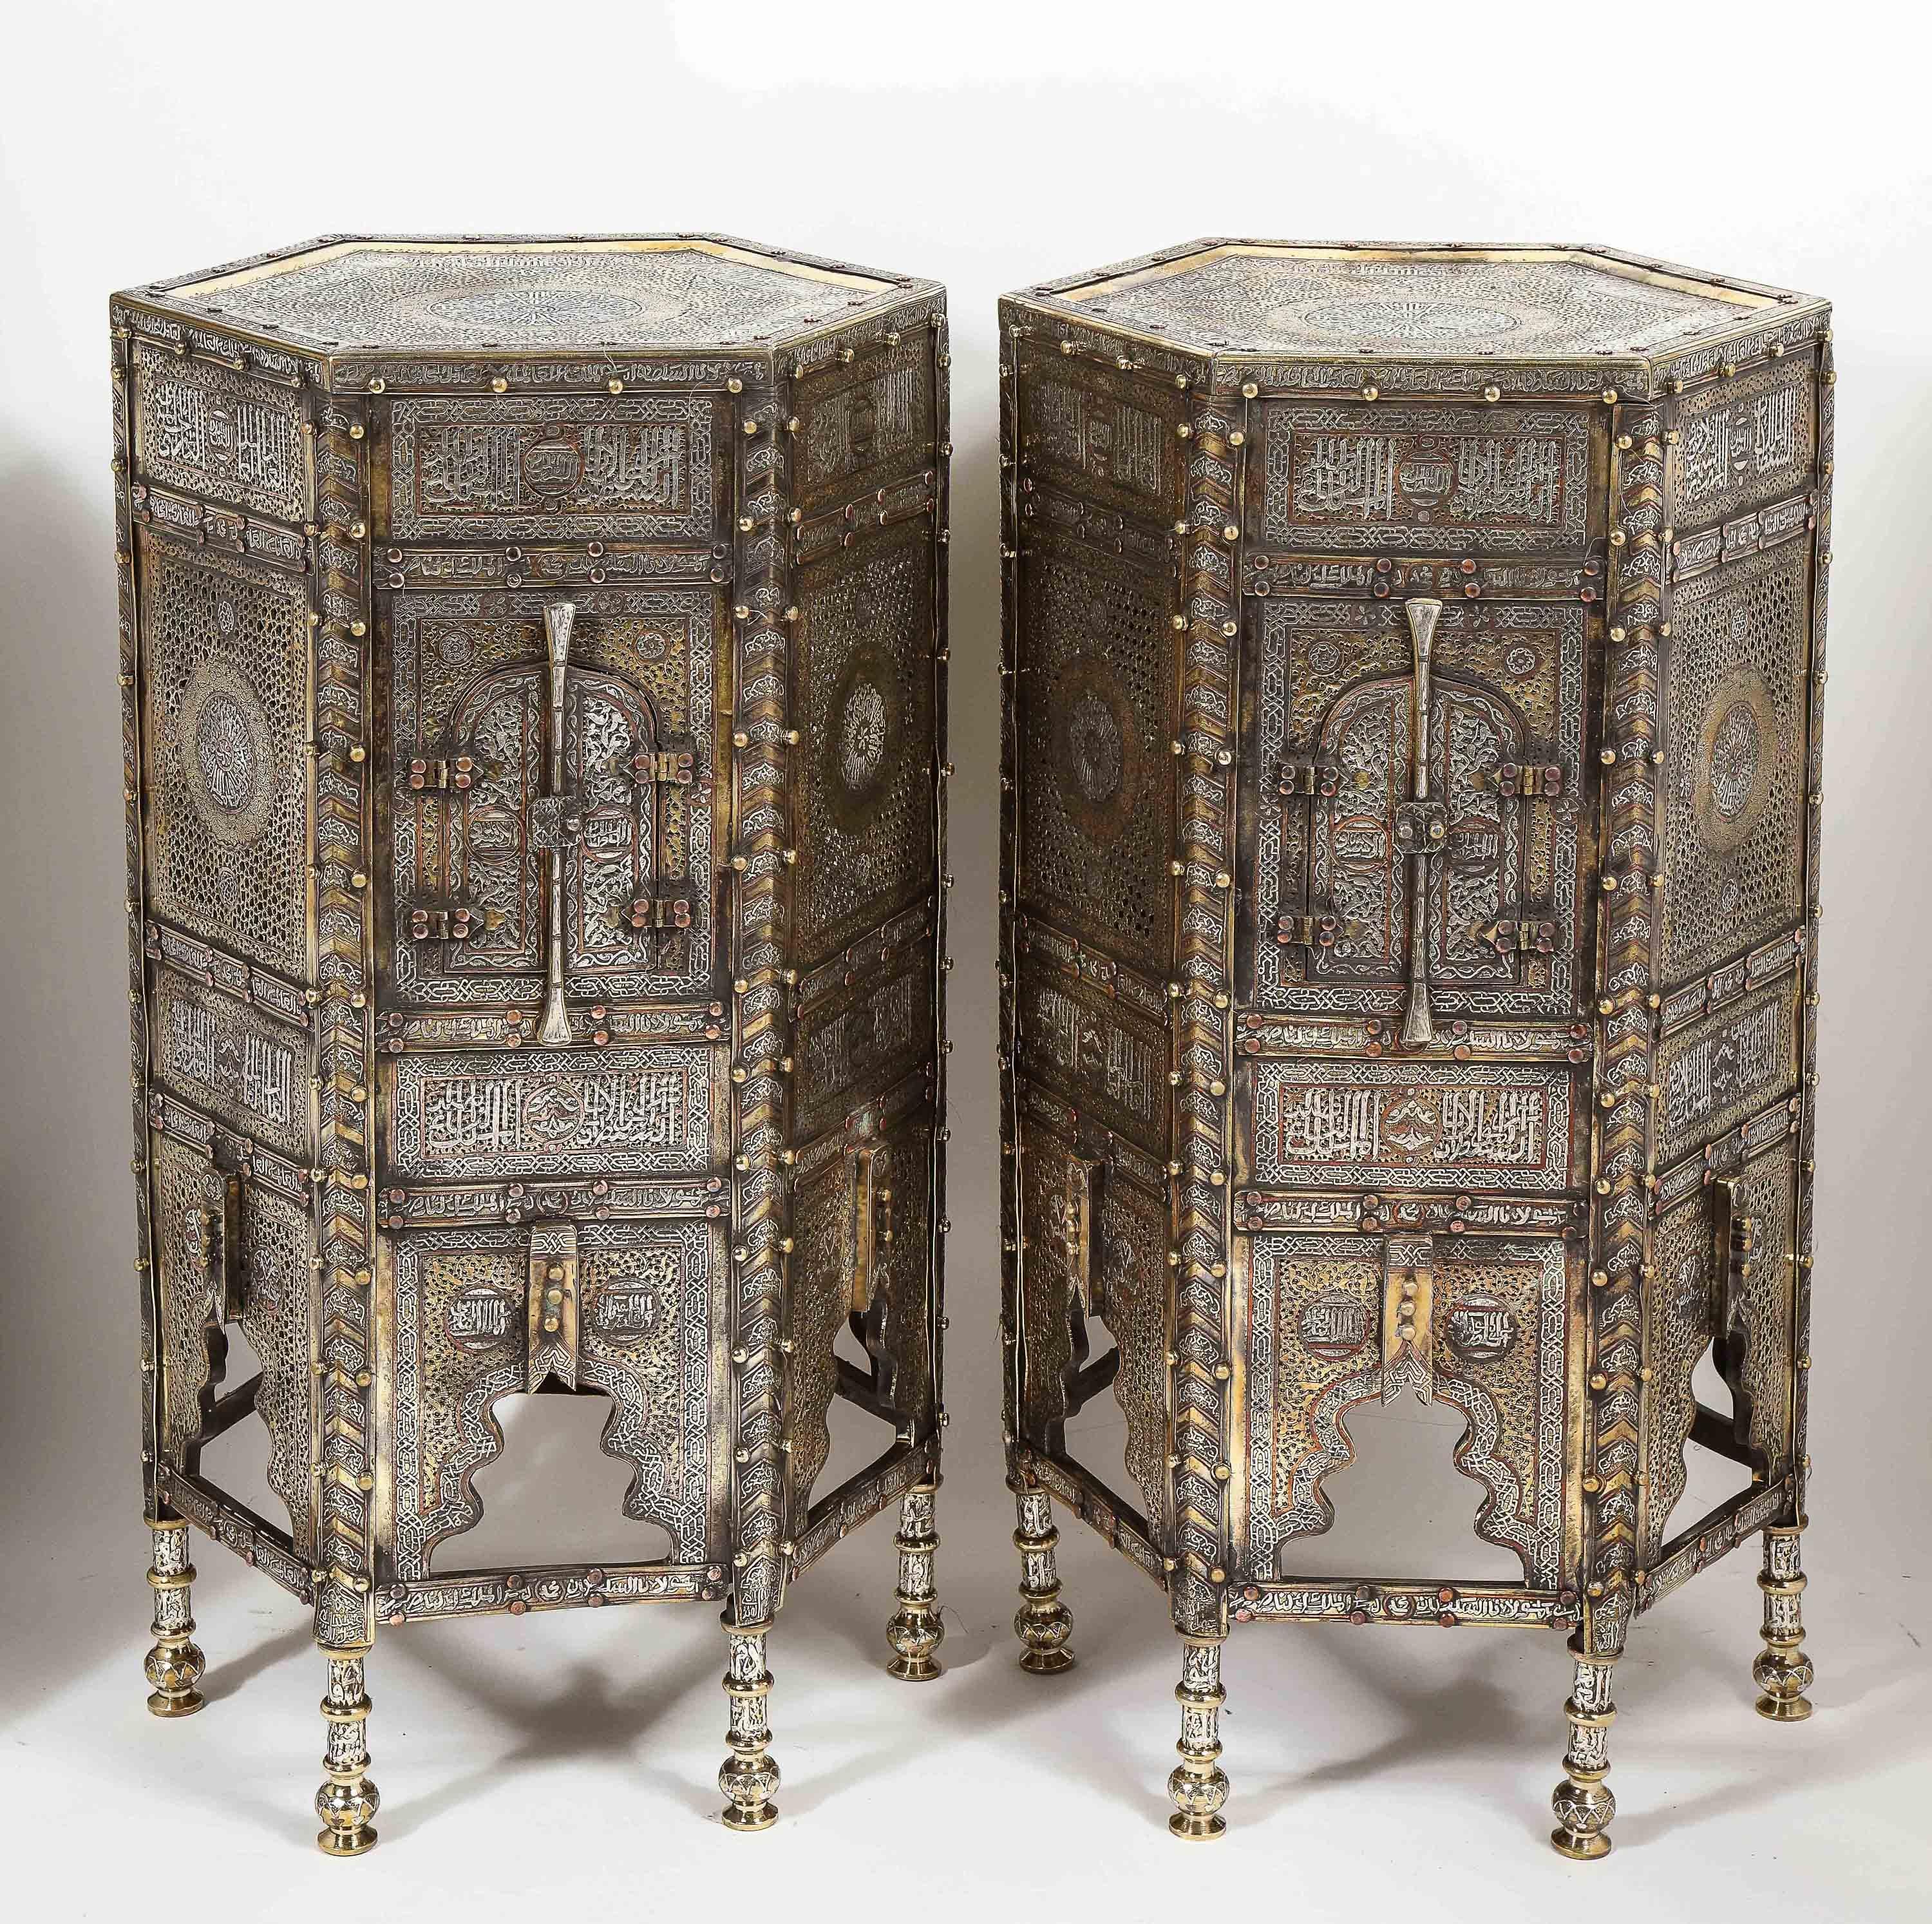 Egyptian Exceptional Pair of Islamic Mamluk Revival Silver Inlaid Quran Side Tables For Sale